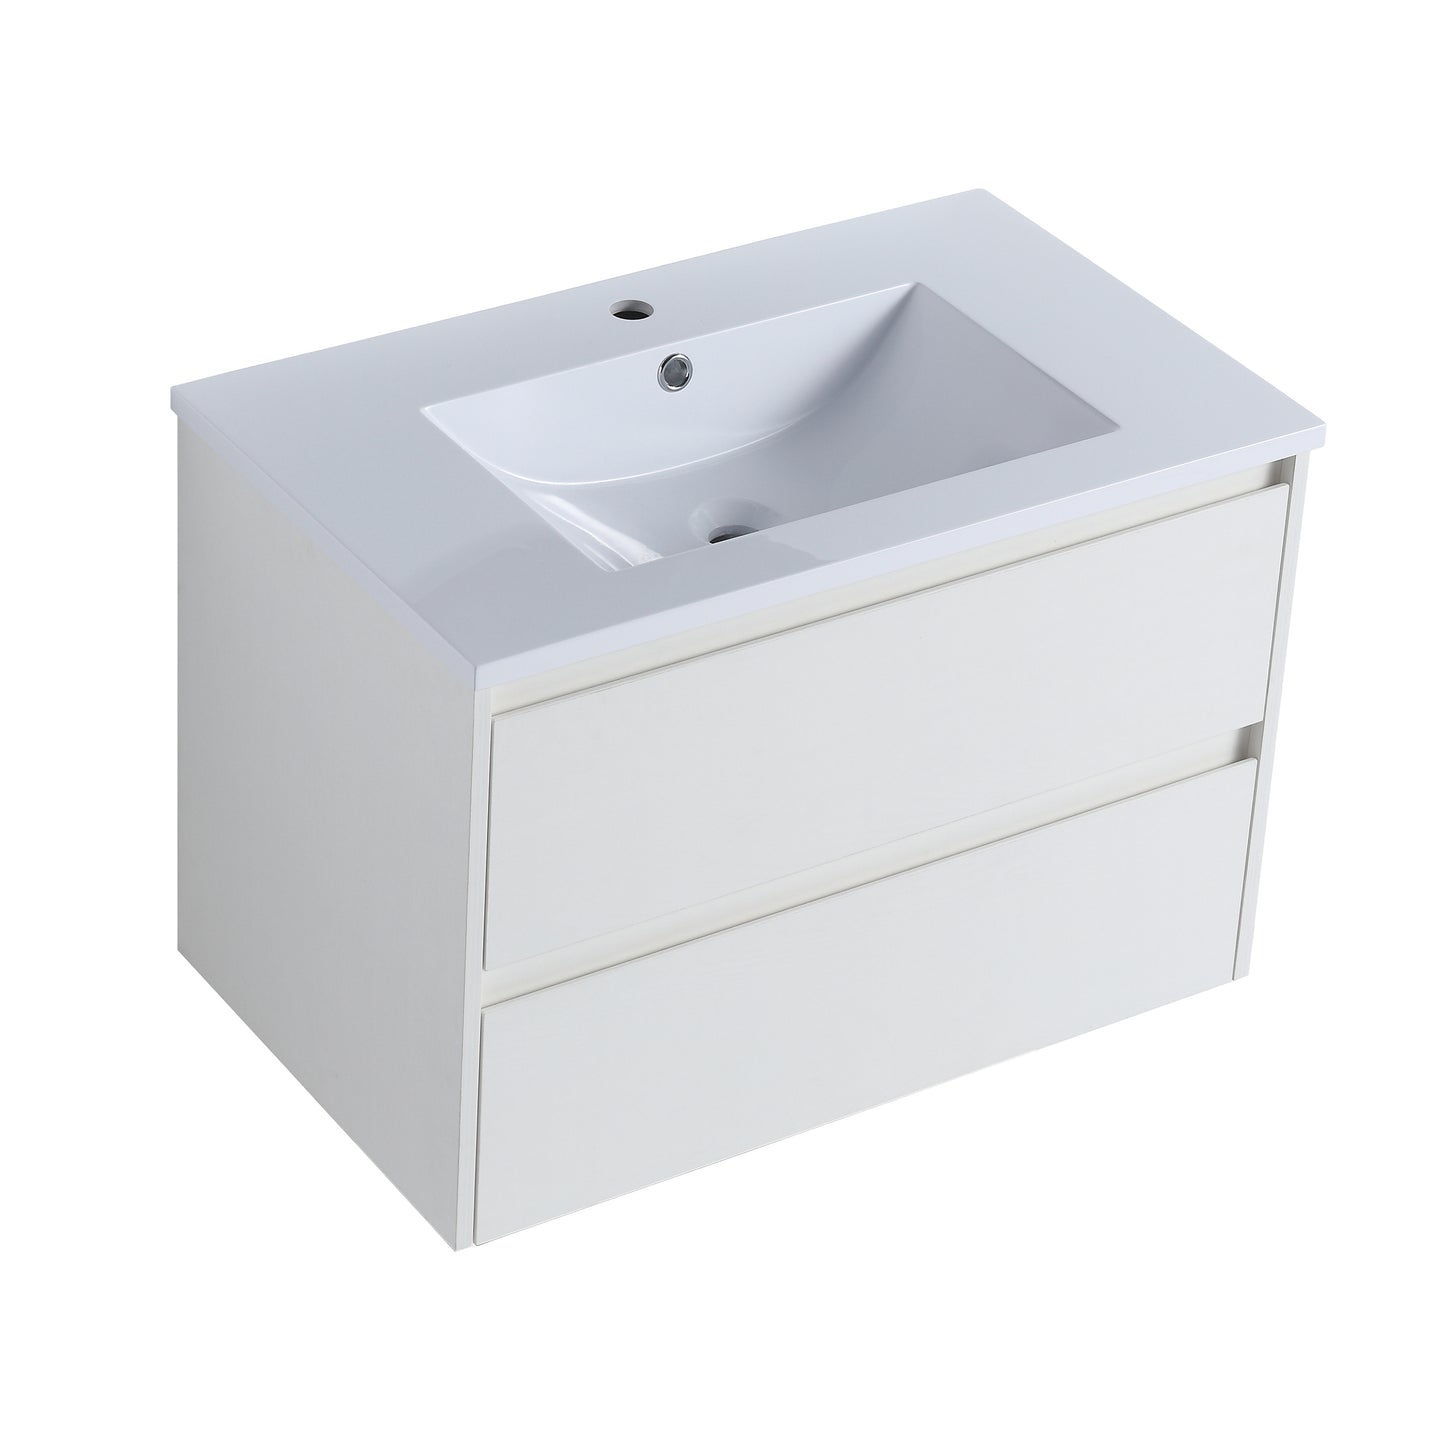 Bathroom Vanity with 2/3 Soft Close drawers, 30x18